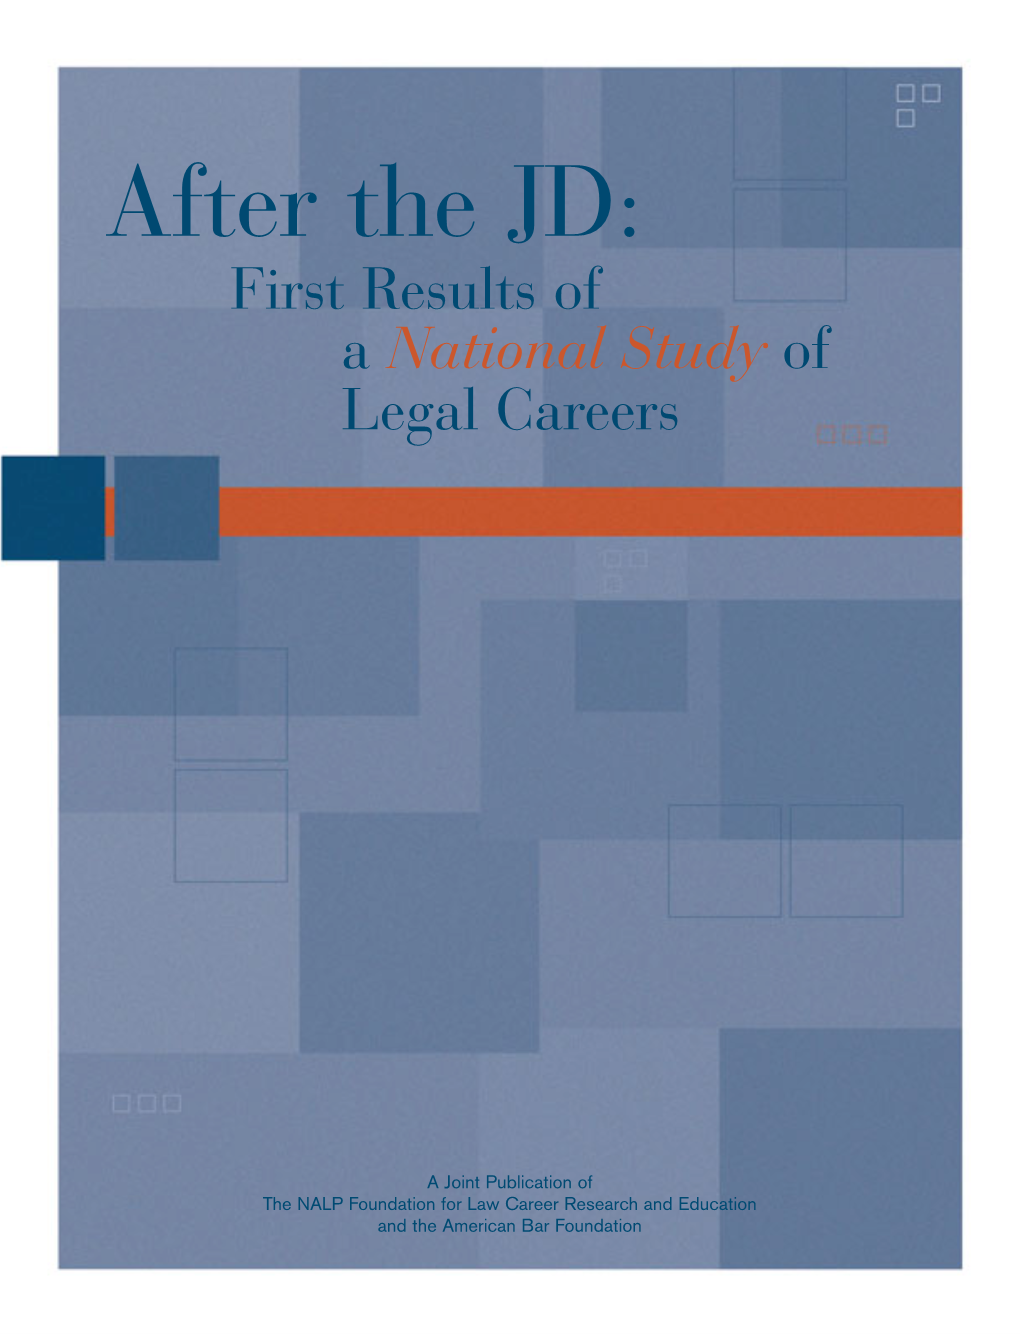 After the JD: First Results of a National Study Legal Careers After the JD: After the JD: First Results of a National Study of Legal Careers NALP Foundation/ABF